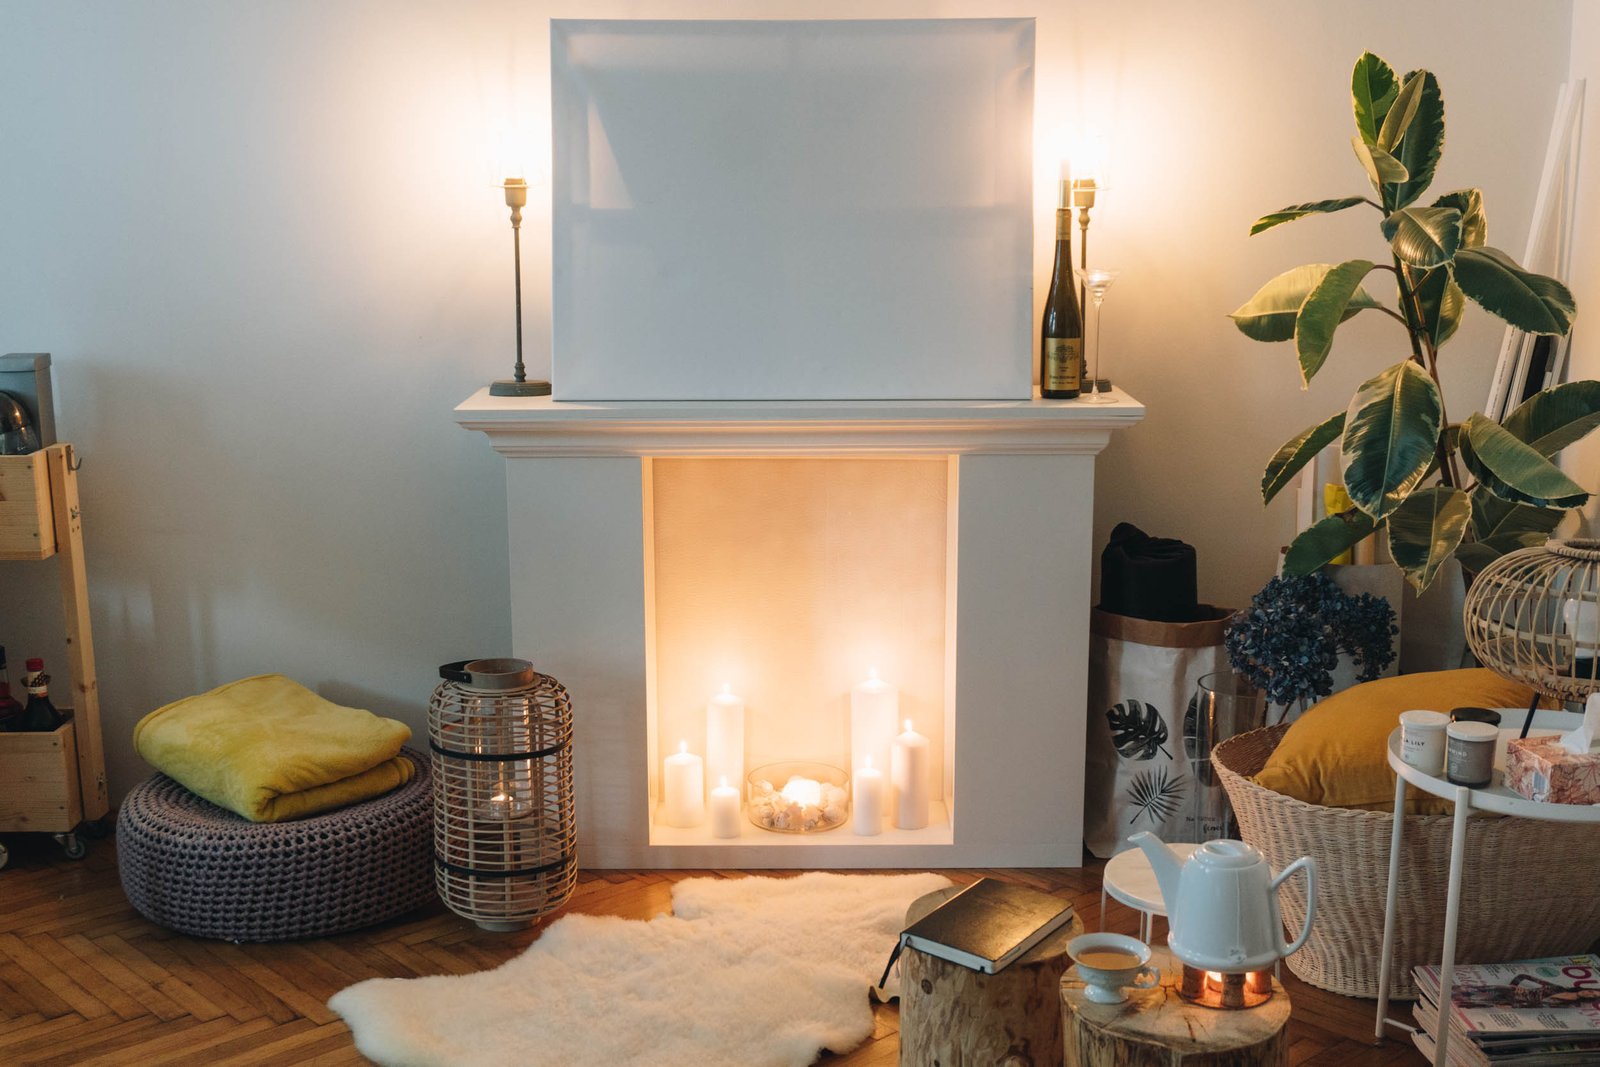 Tips and tricks on how to decorate the disused fireplace